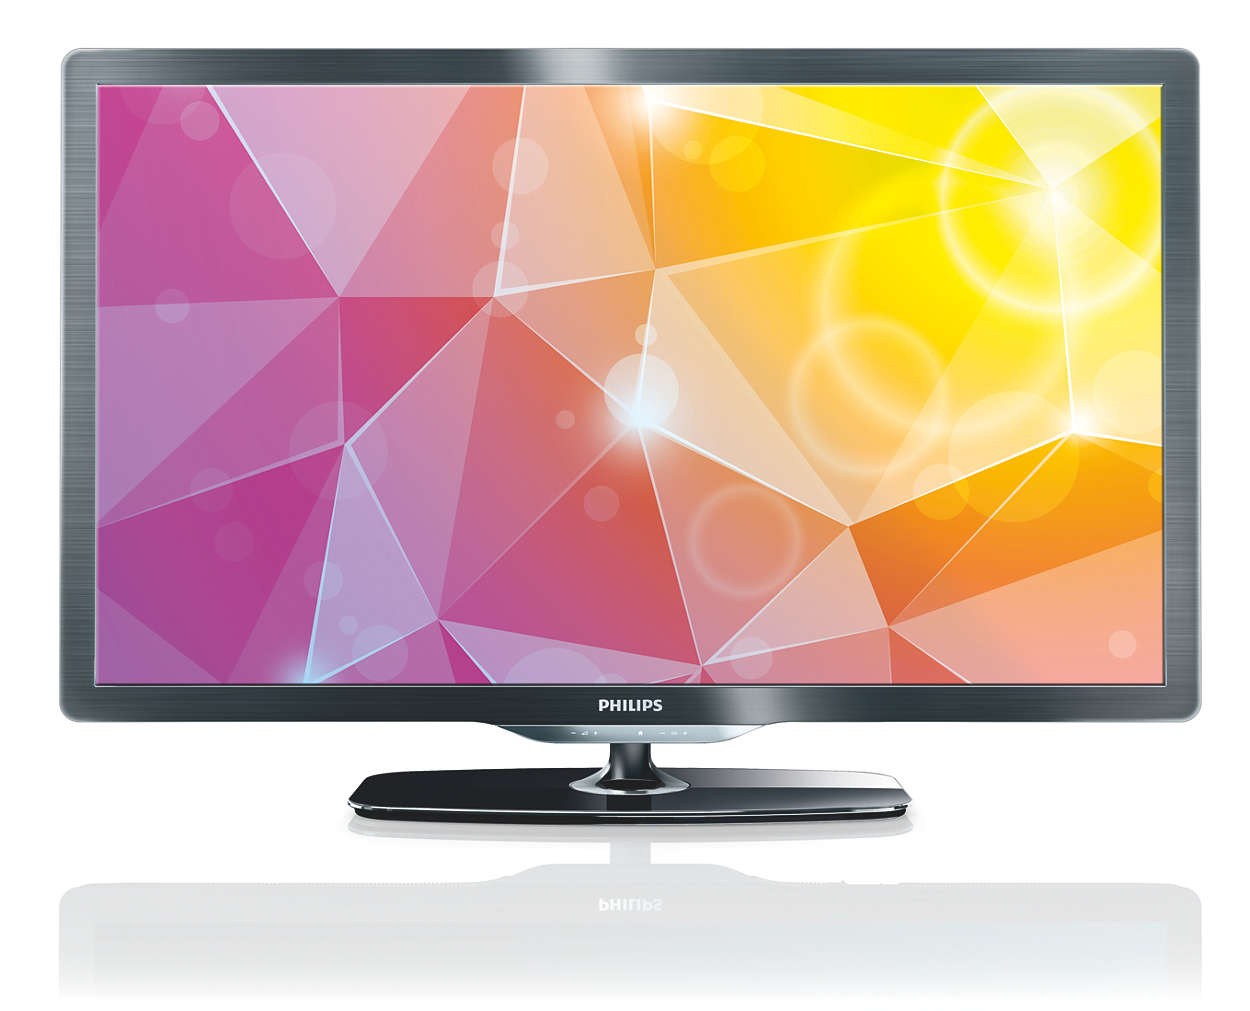 Inzet spectrum Edele Professional LED LCD-TV 55HFL5573D/10 | Philips